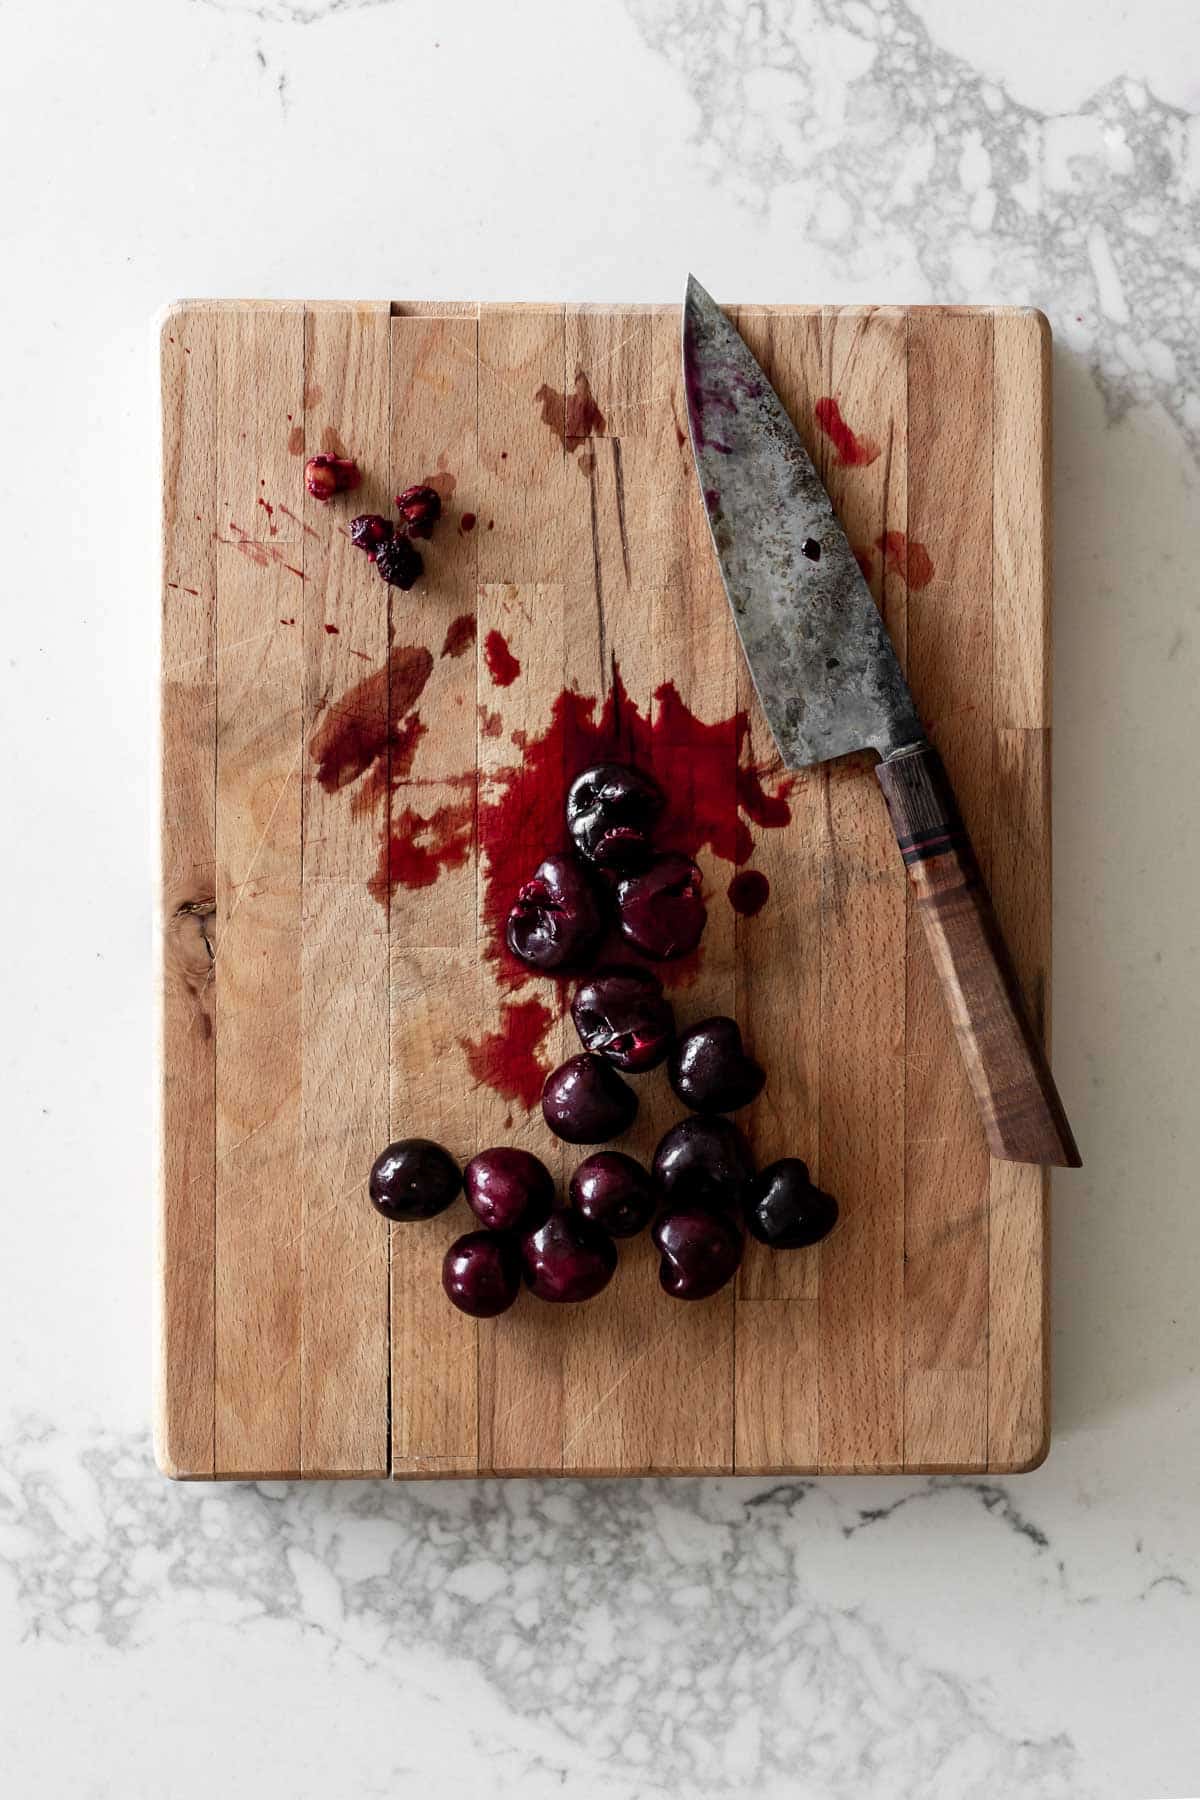 Crushed cherries on a cutting board with a knife